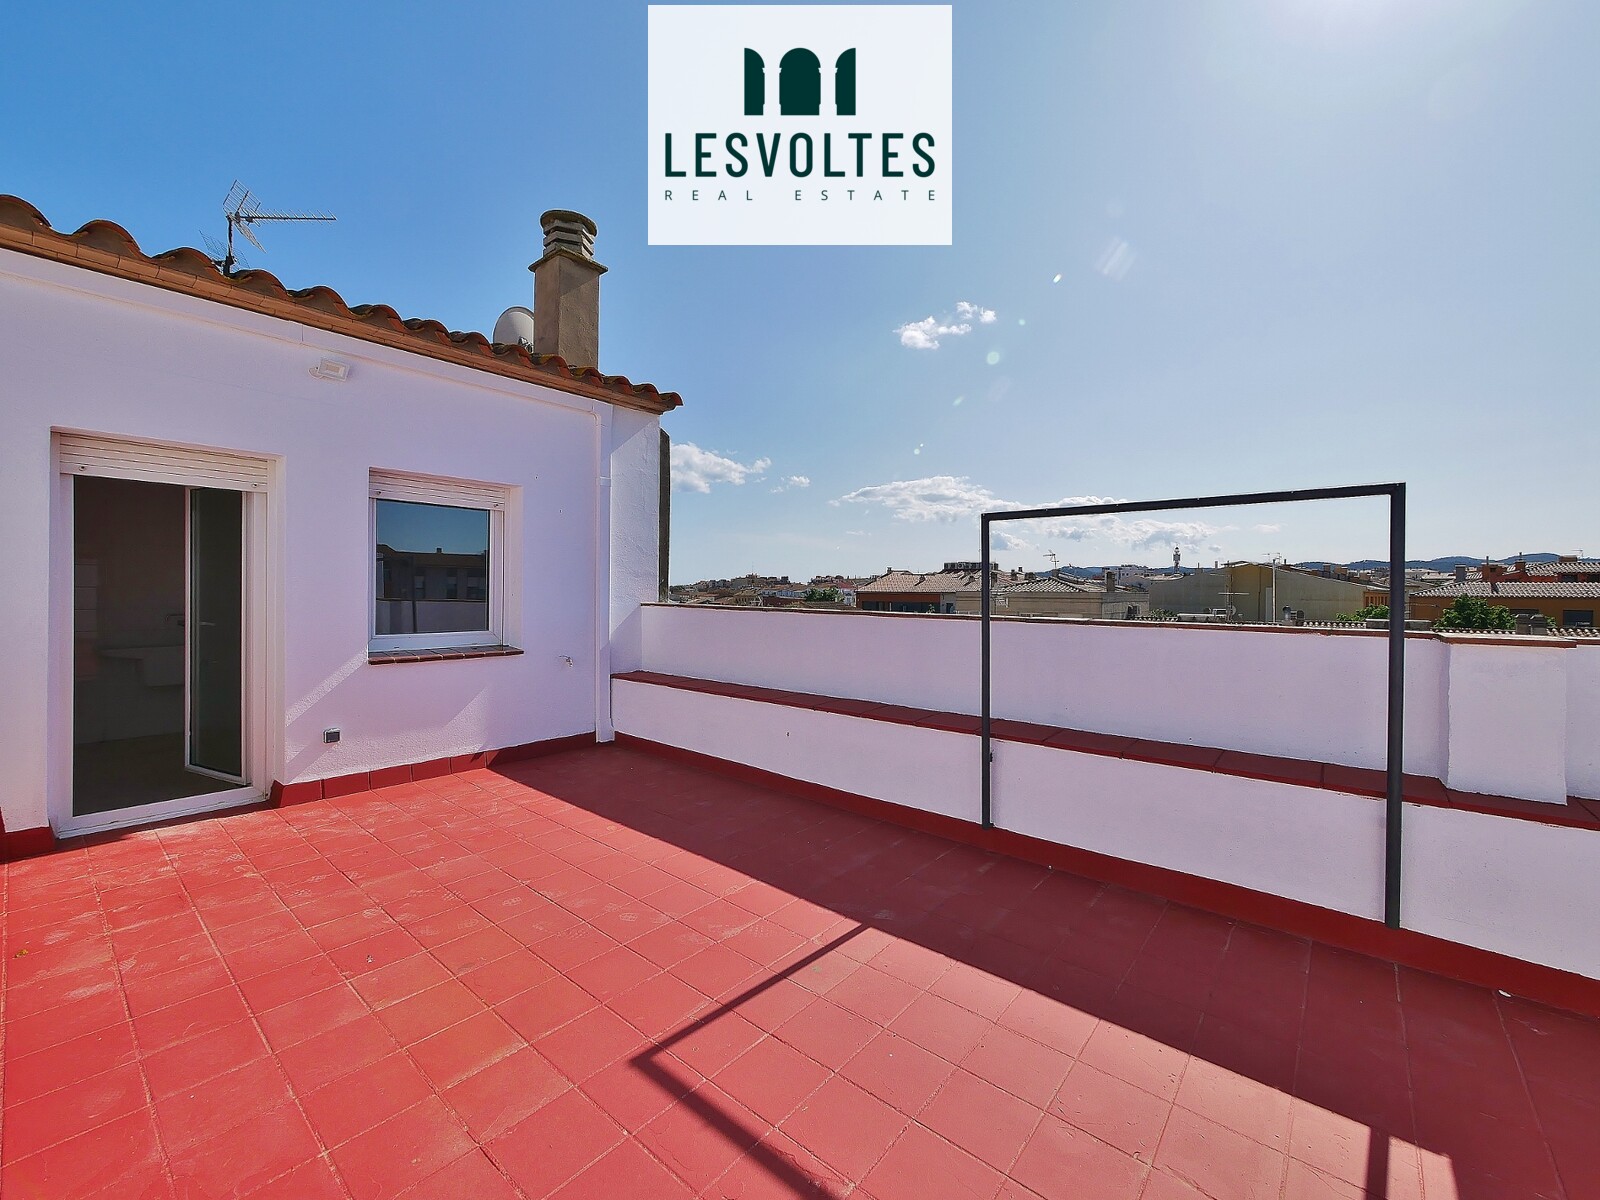 RECENTLY RENOVATED DUPLEX WITH 4 BEDROOMS WITH LARGE TERRACE, A FEW METERS FROM THE CENTER OF PALAFRUGELL